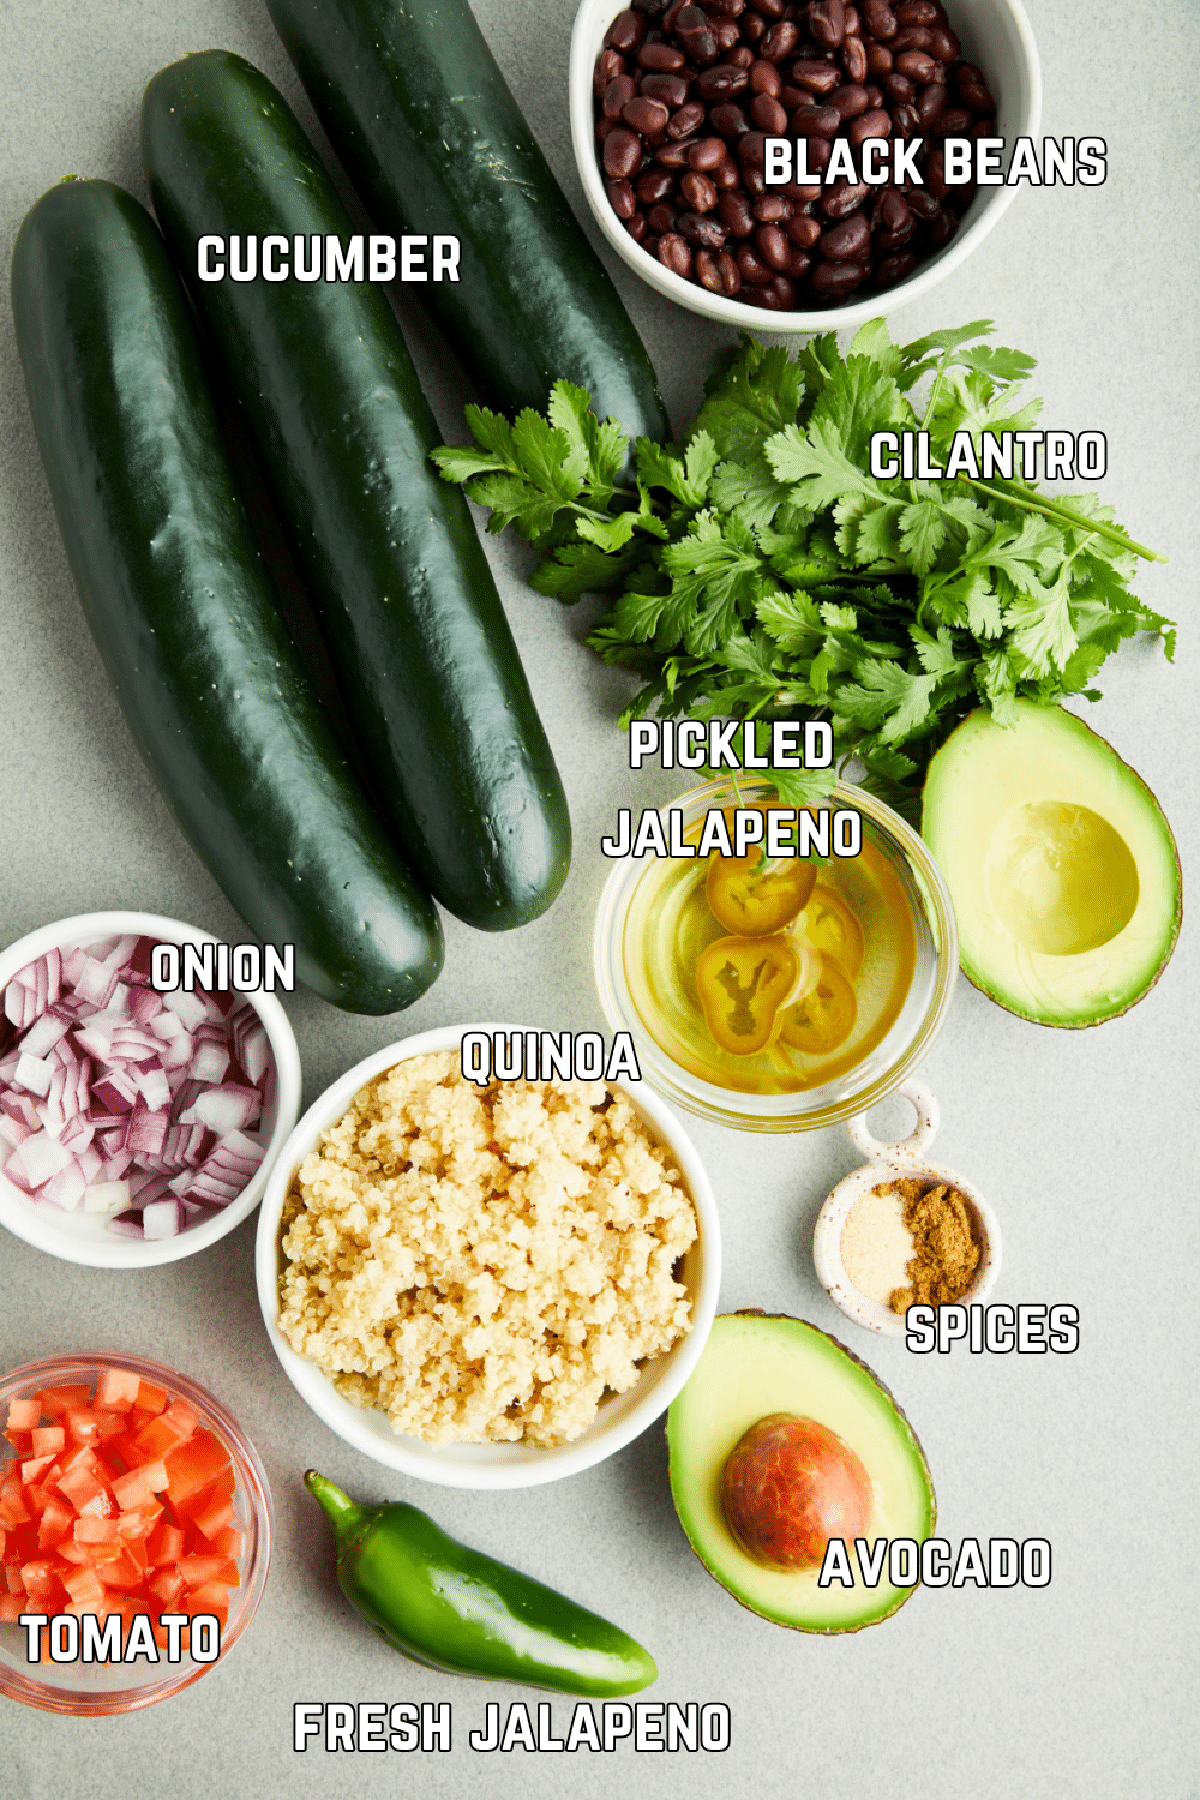 Ingredients to make tex mex cucumber boats: cucumbers, black beans, fresh herbs, pickled and fresh jalapeno, avocado, spices, quinoa, onion, and tomato.